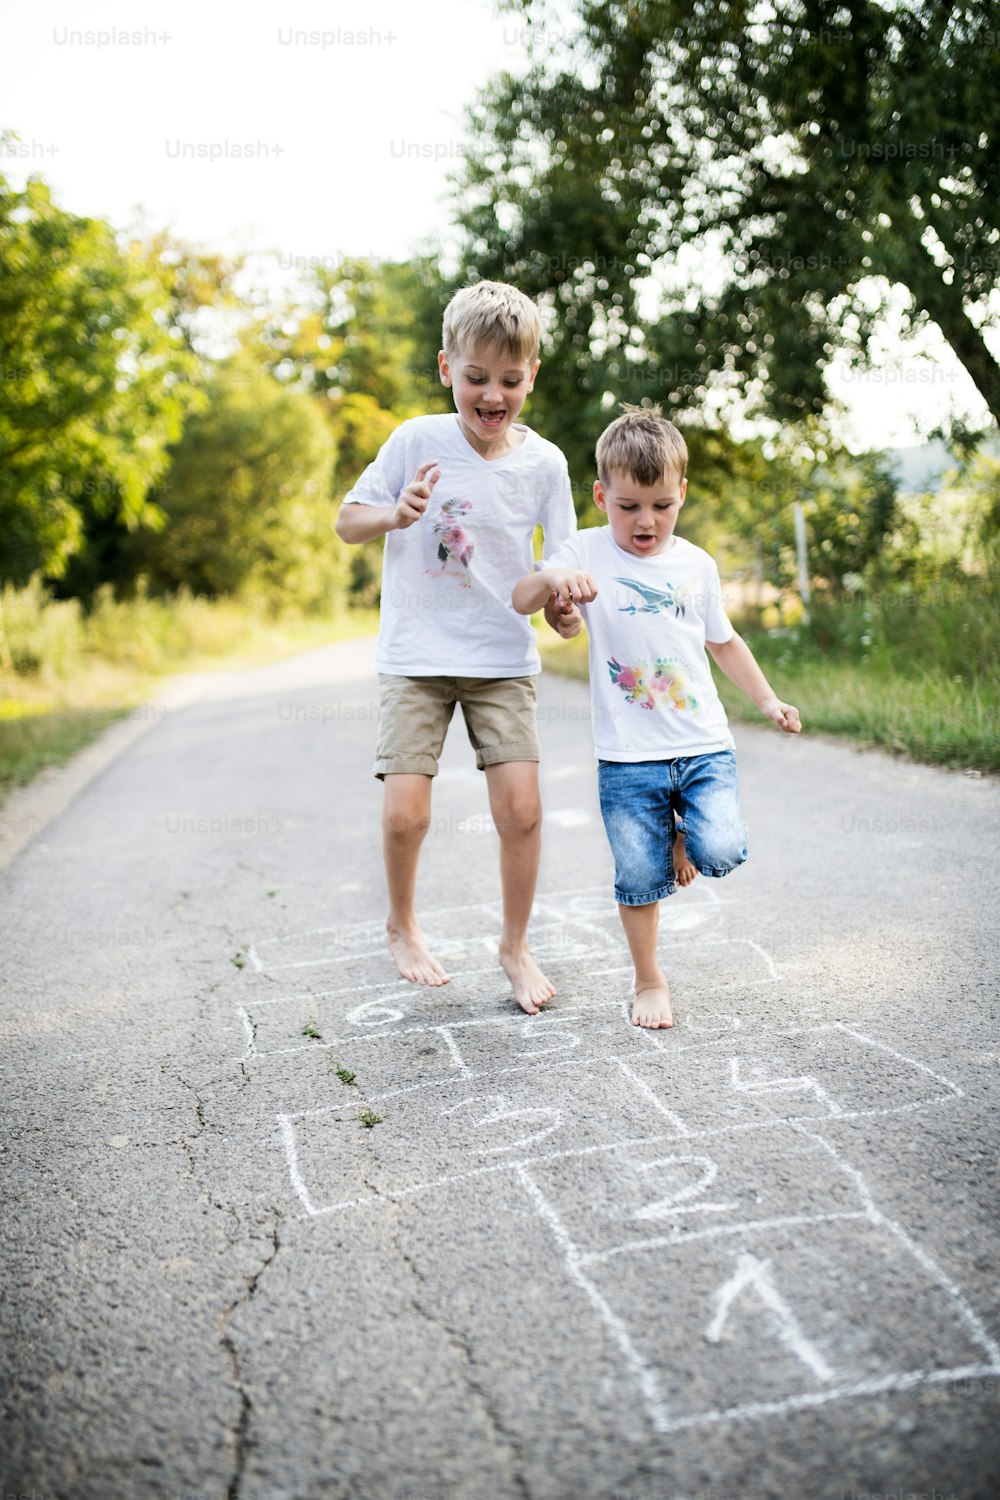 Two barefoot cheerful small boys hopscotching on a road in park on a summer day.